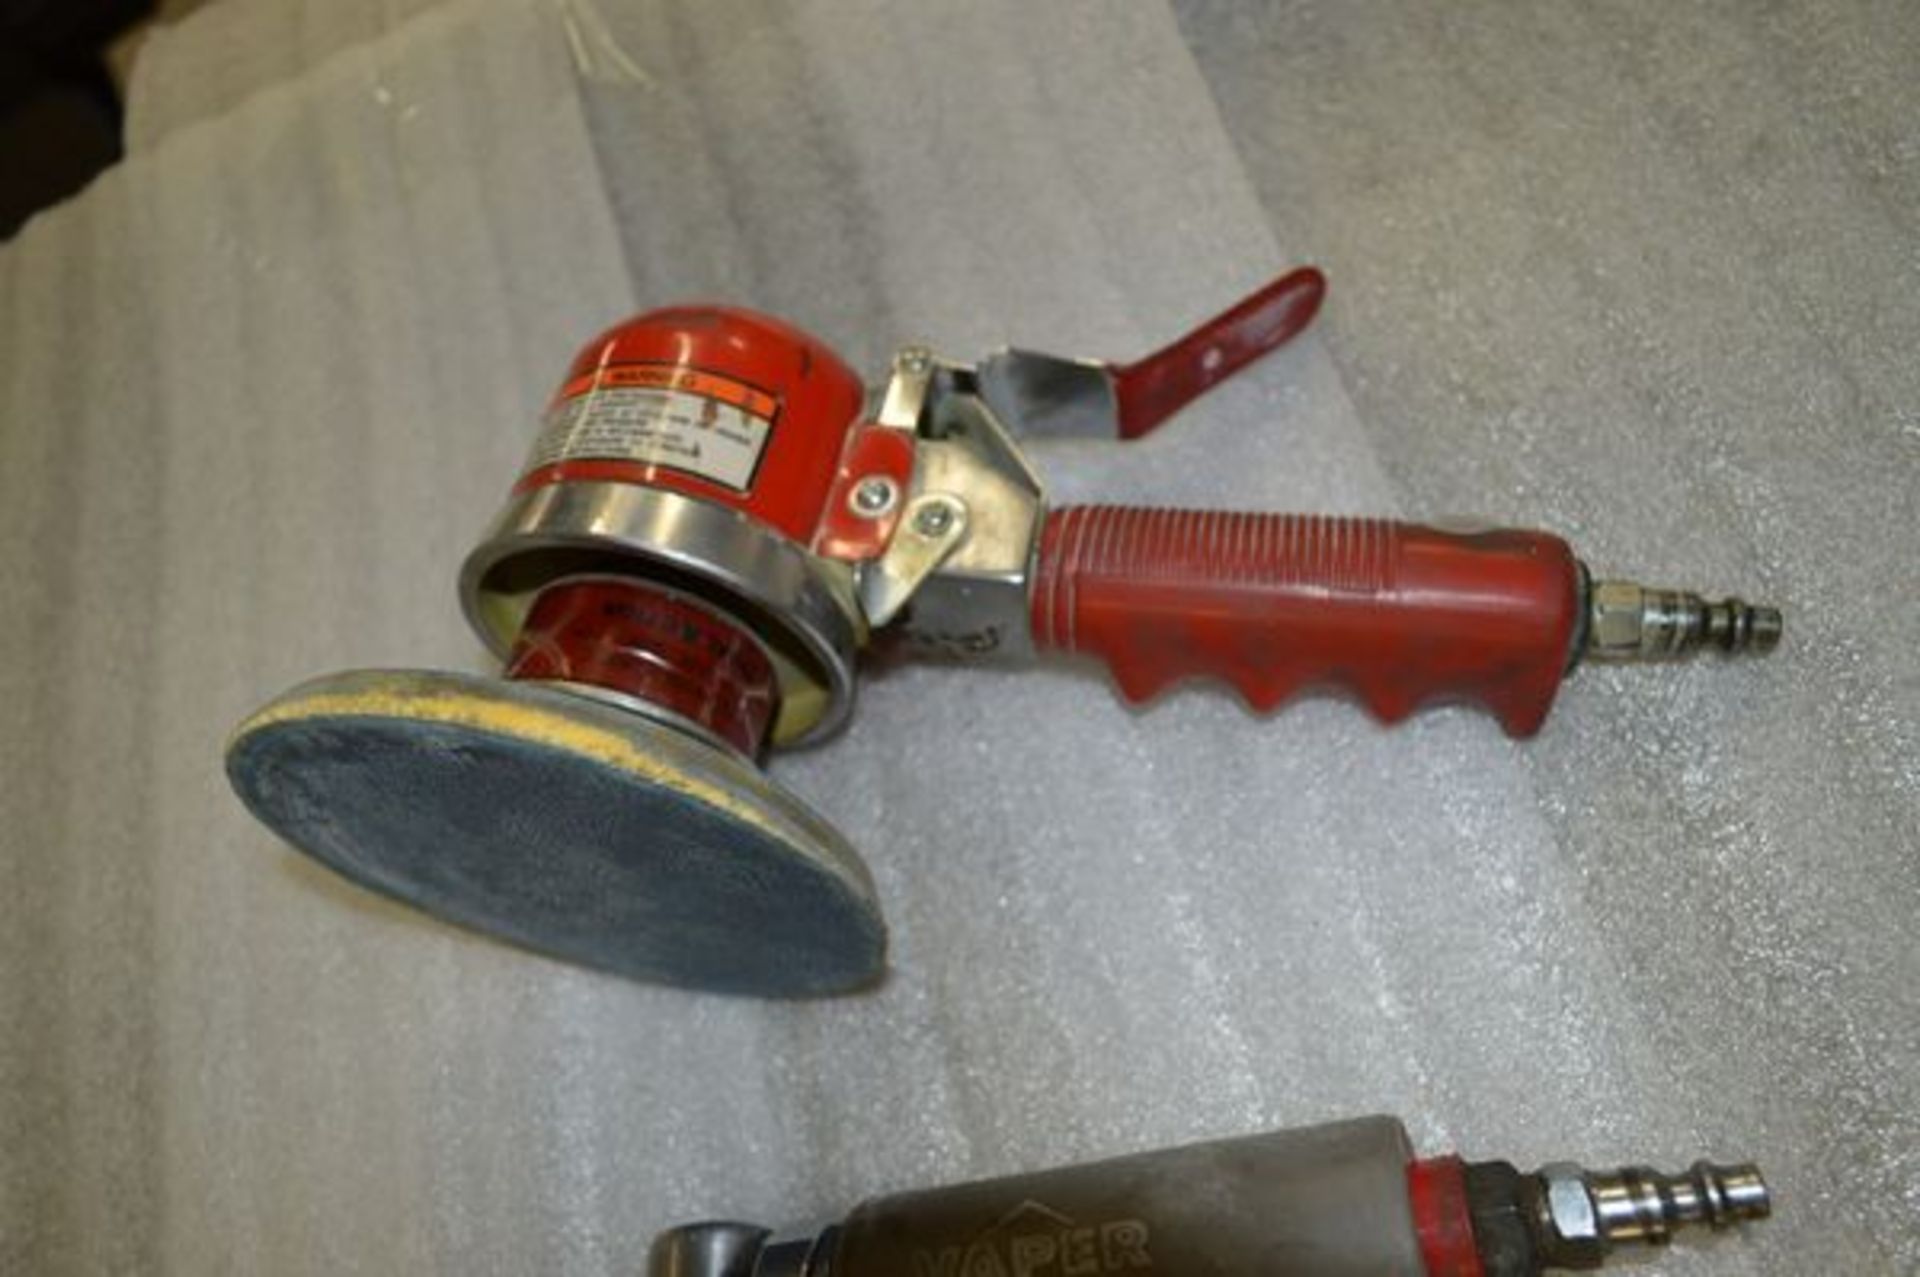 Various Newmatic Hand Tools, Grinders, Ratchet Wrench, Dayton Dual Action Sander - Image 2 of 6